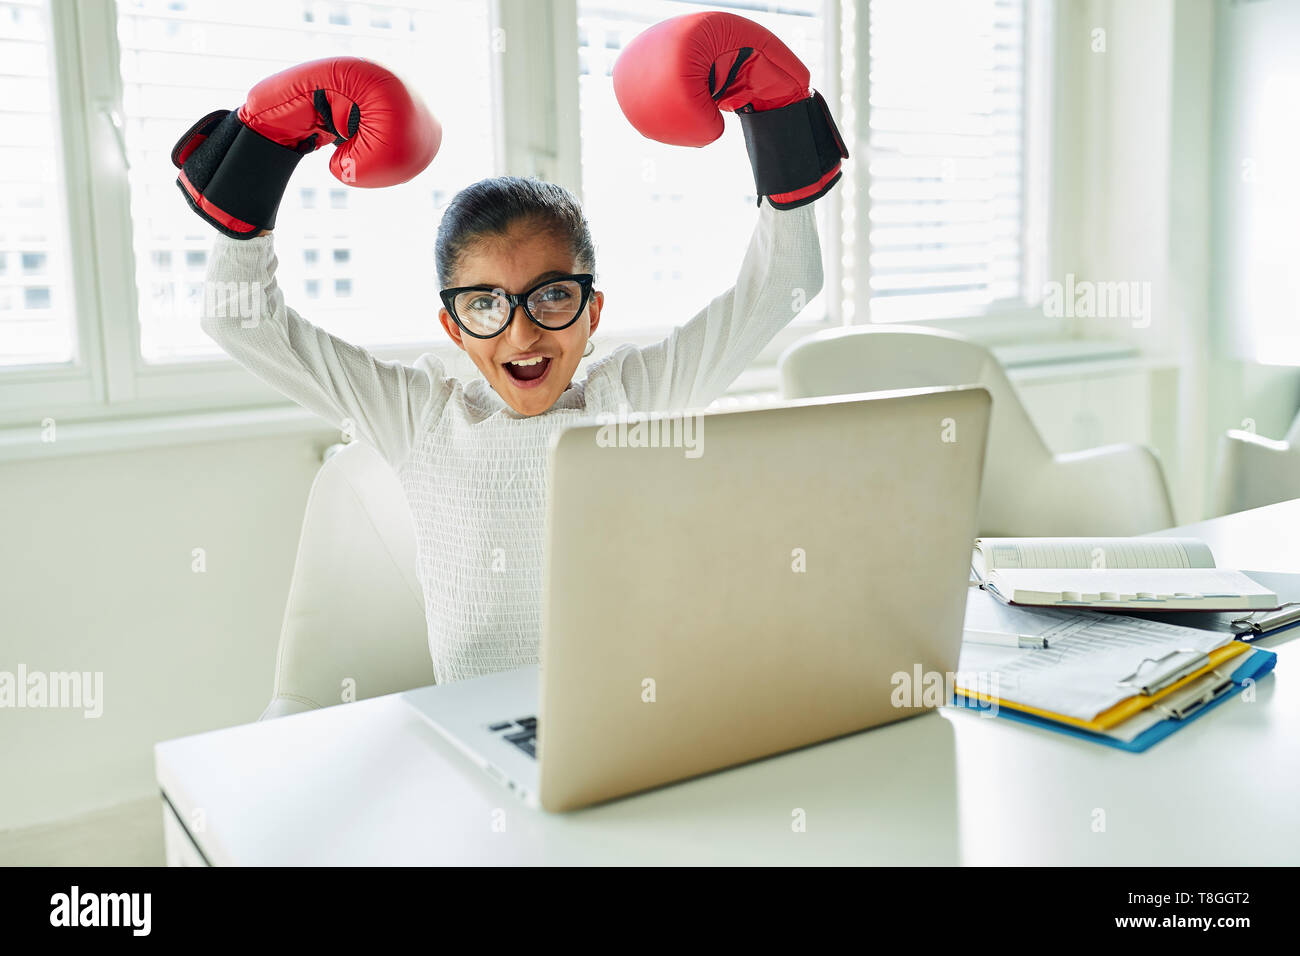 Cheering girl with boxing gloves in business start-up on laptop computer Stock Photo